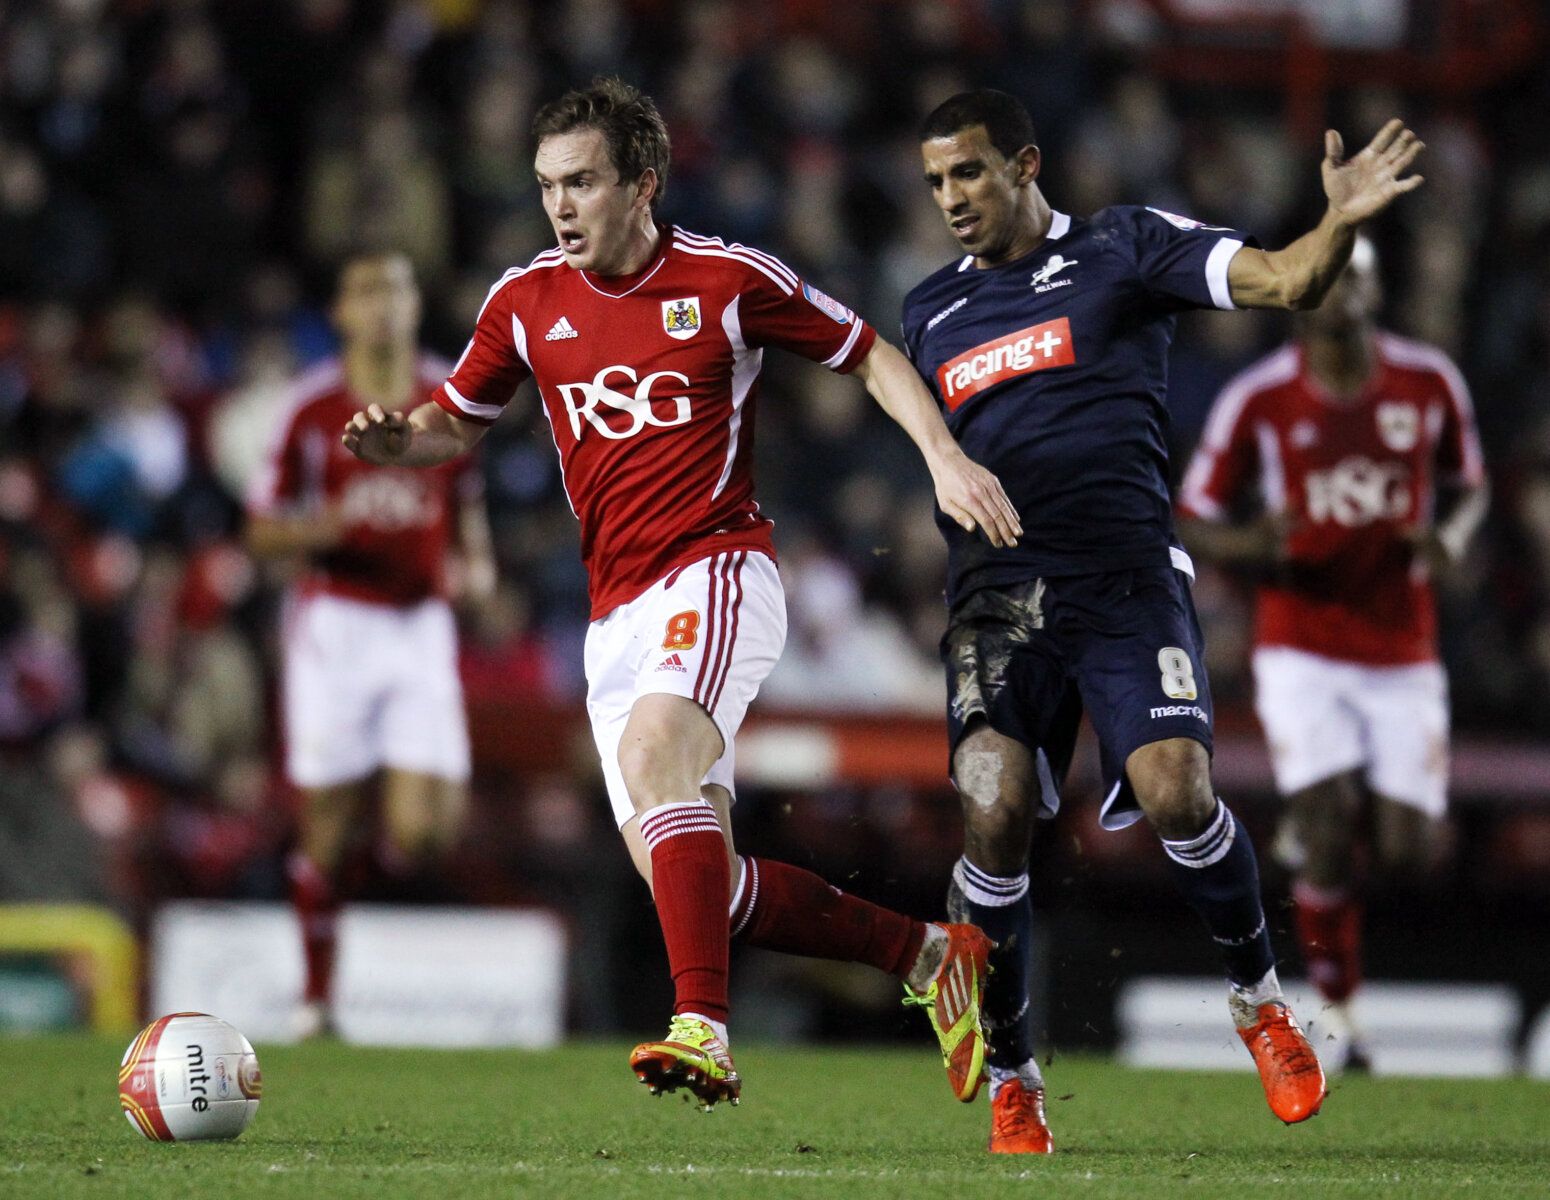 Football - Bristol City v Millwall - npower Football League Championship  - Ashton Gate  - 11/12 - 3/1/12 
Bristol City's Neil Kilkenny (L) and Millwall's Hameur Bouazza in action 
Mandatory Credit: Action Images / Andrew Couldridge 
EDITORIAL USE ONLY. No use with unauthorized audio, video, data, fixture lists, club/league logos or live services. Online in-match use limited to 45 images, no video emulation. No use in betting, games or single club/league/player publications.  Please contact your